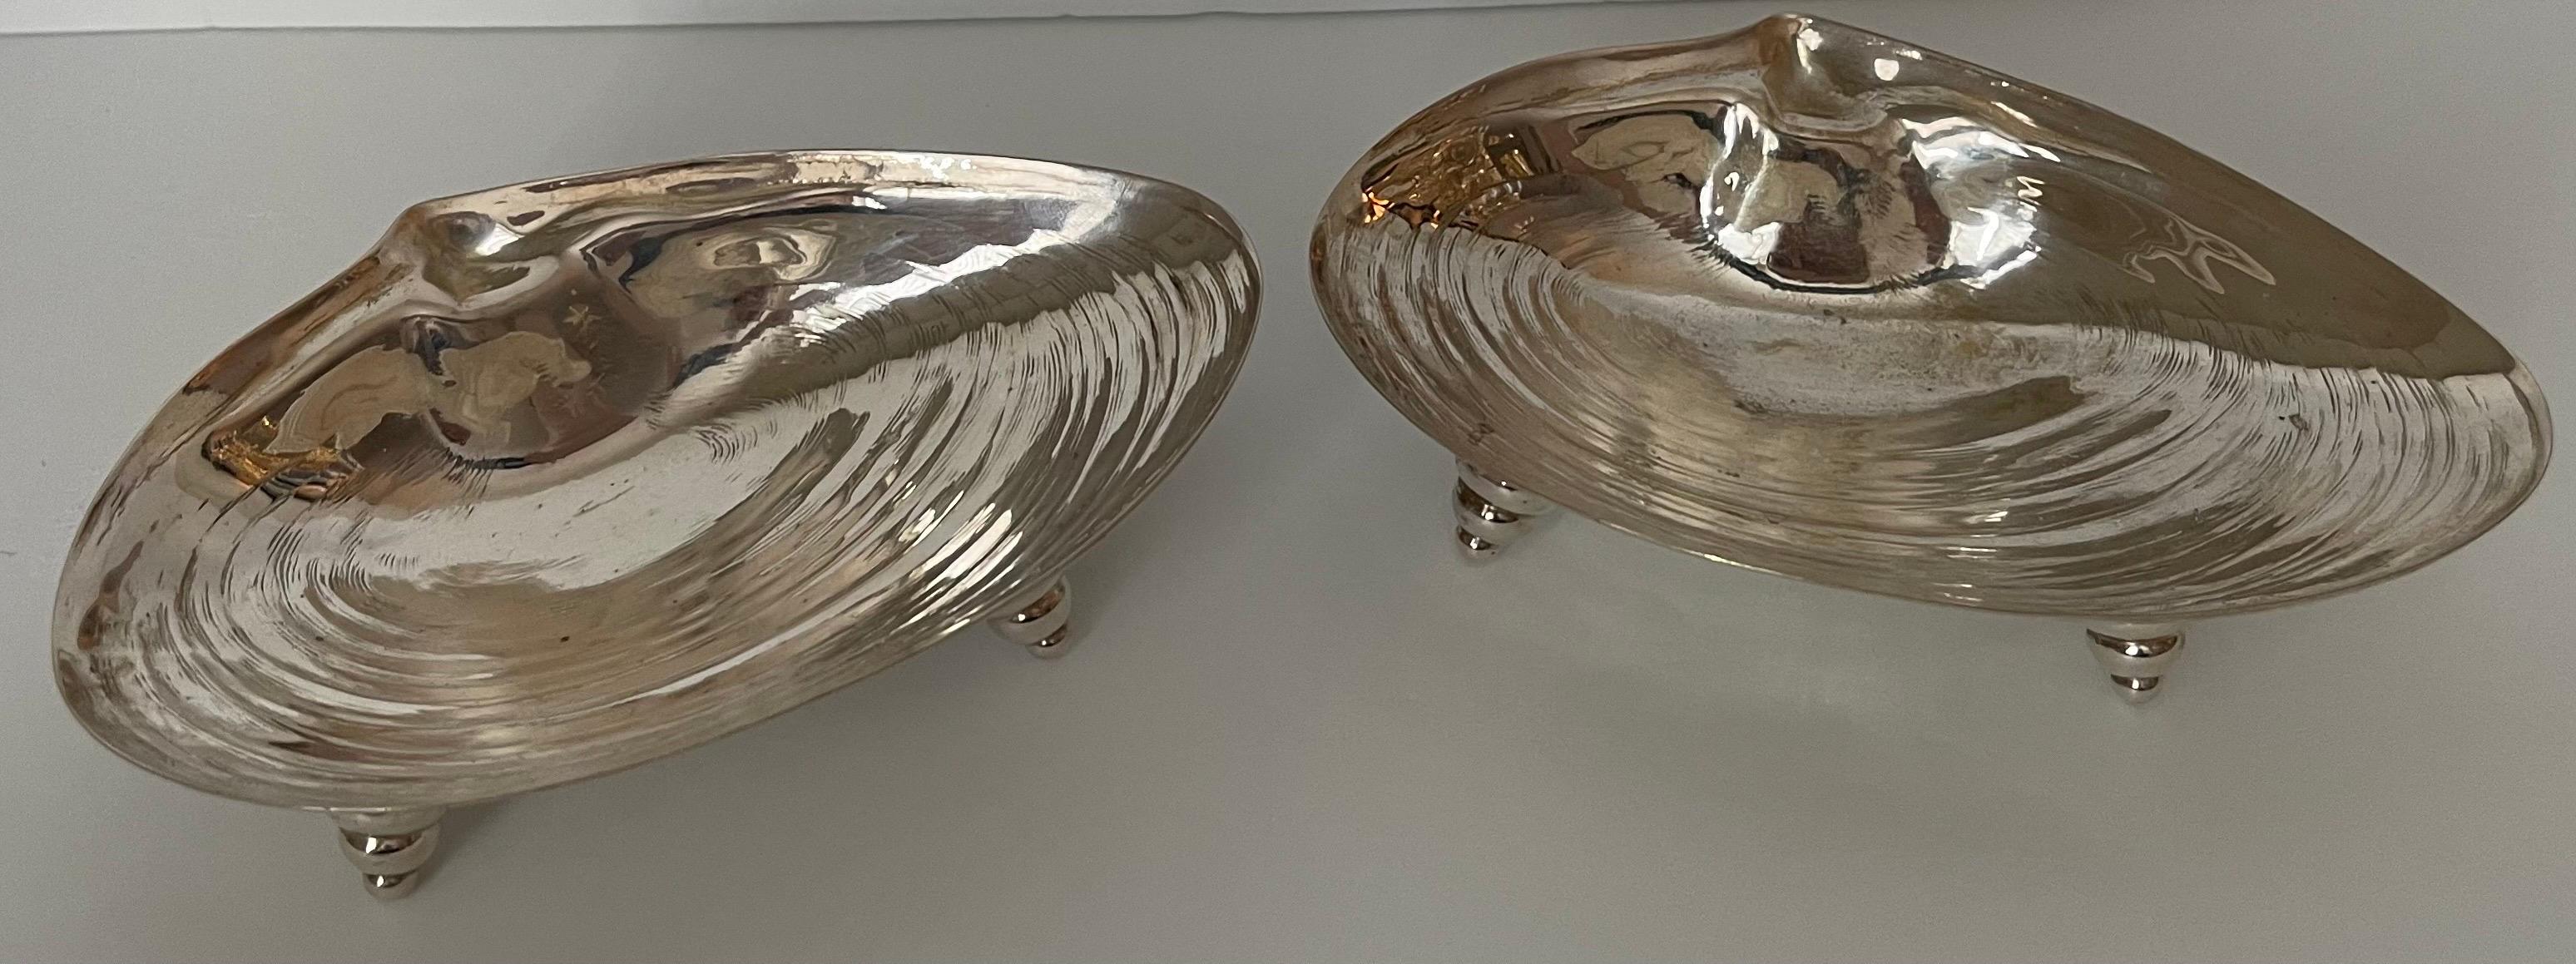 Silver Plated Shell Form Candy Dishes or Ashtrays, Pair In Good Condition For Sale In Stamford, CT